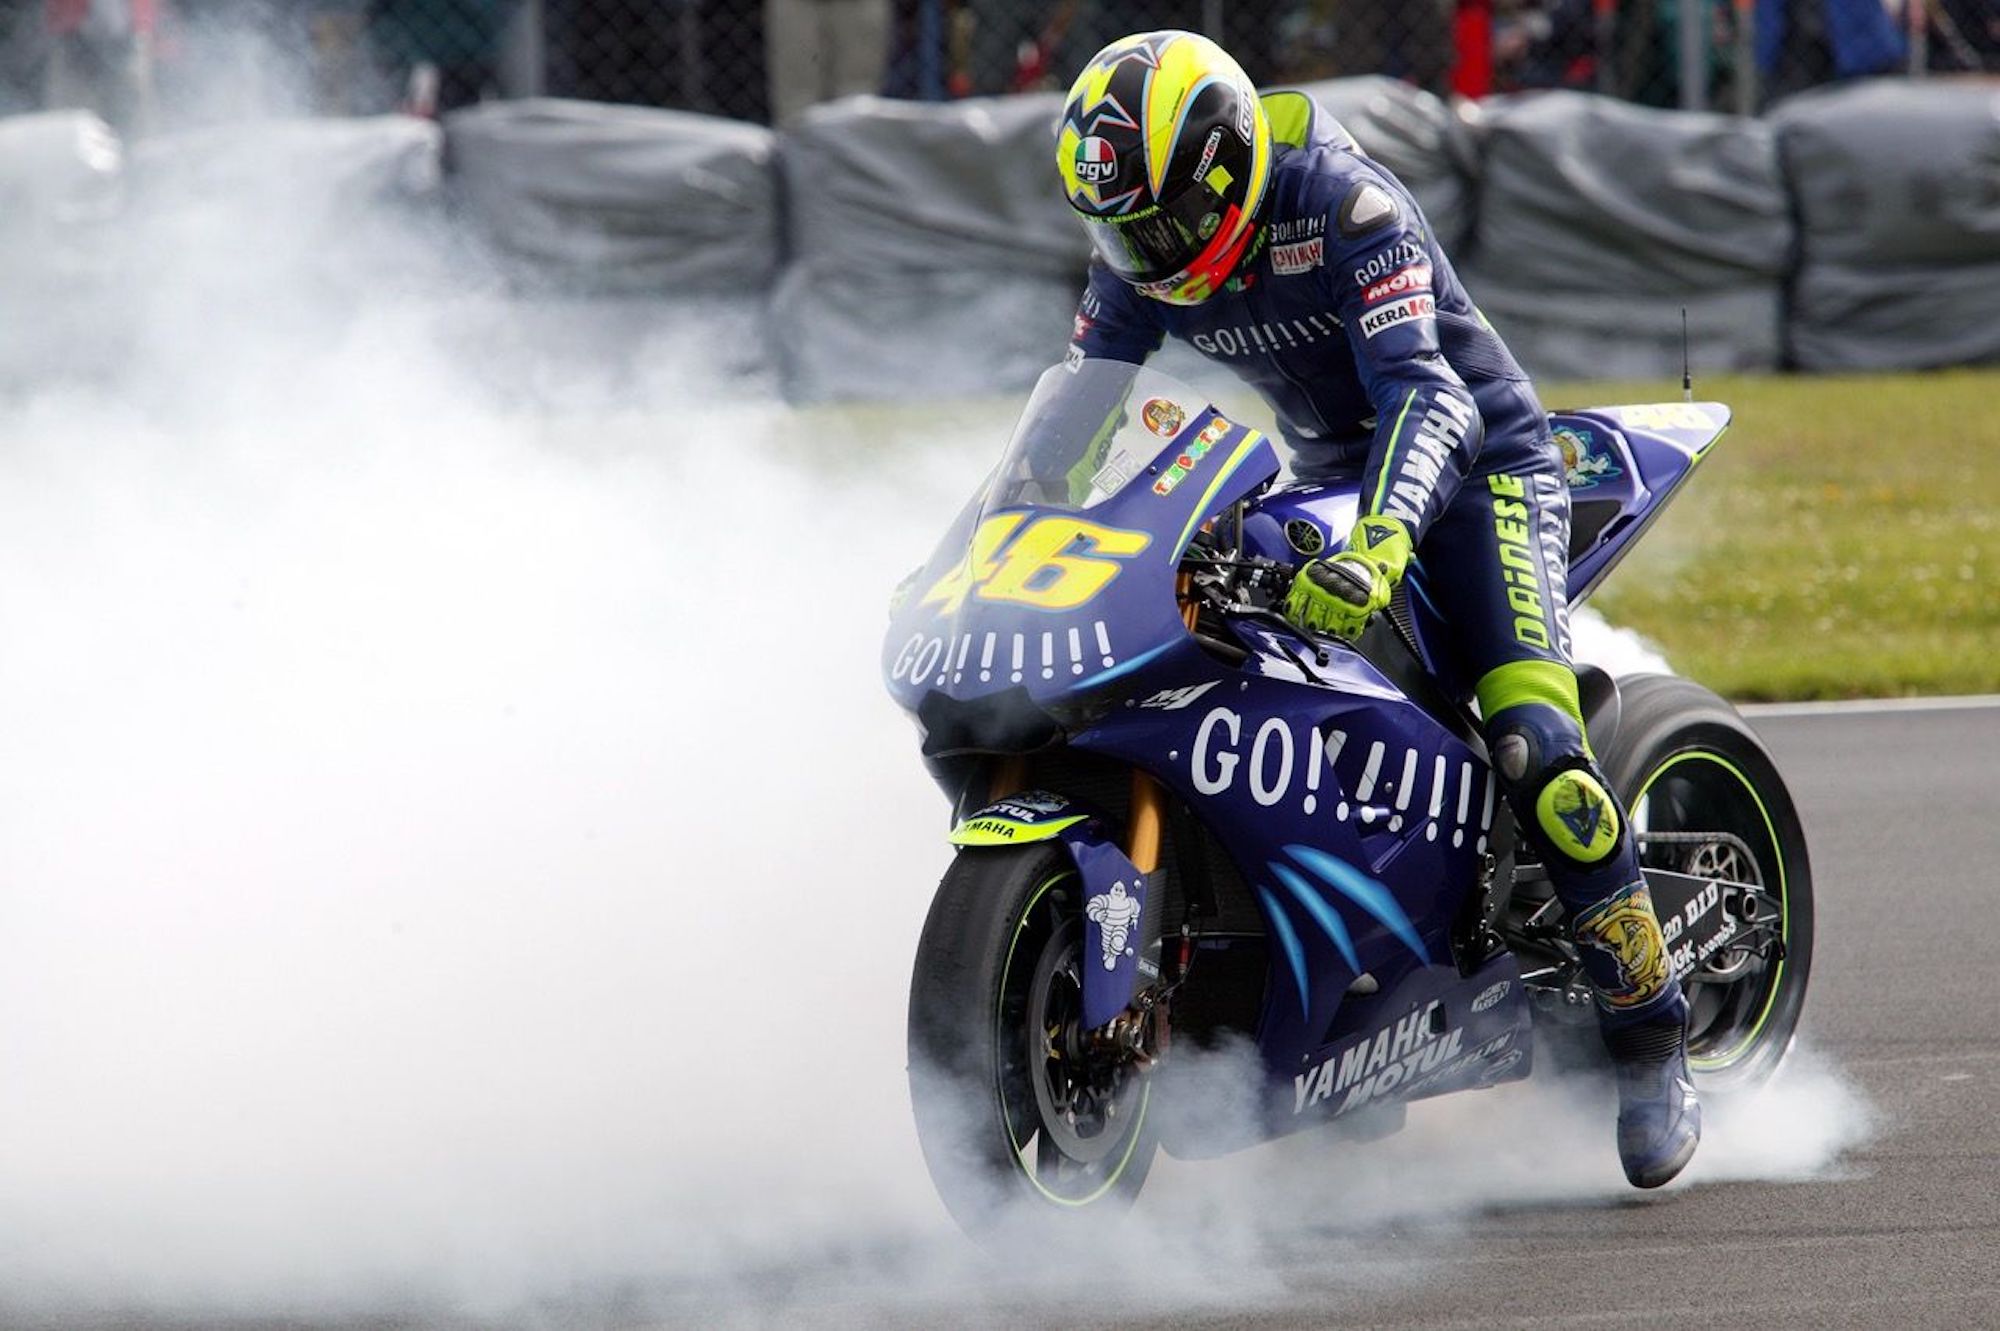 Valentino Rossi on his machine of choice. Media sourced from Yamaha.